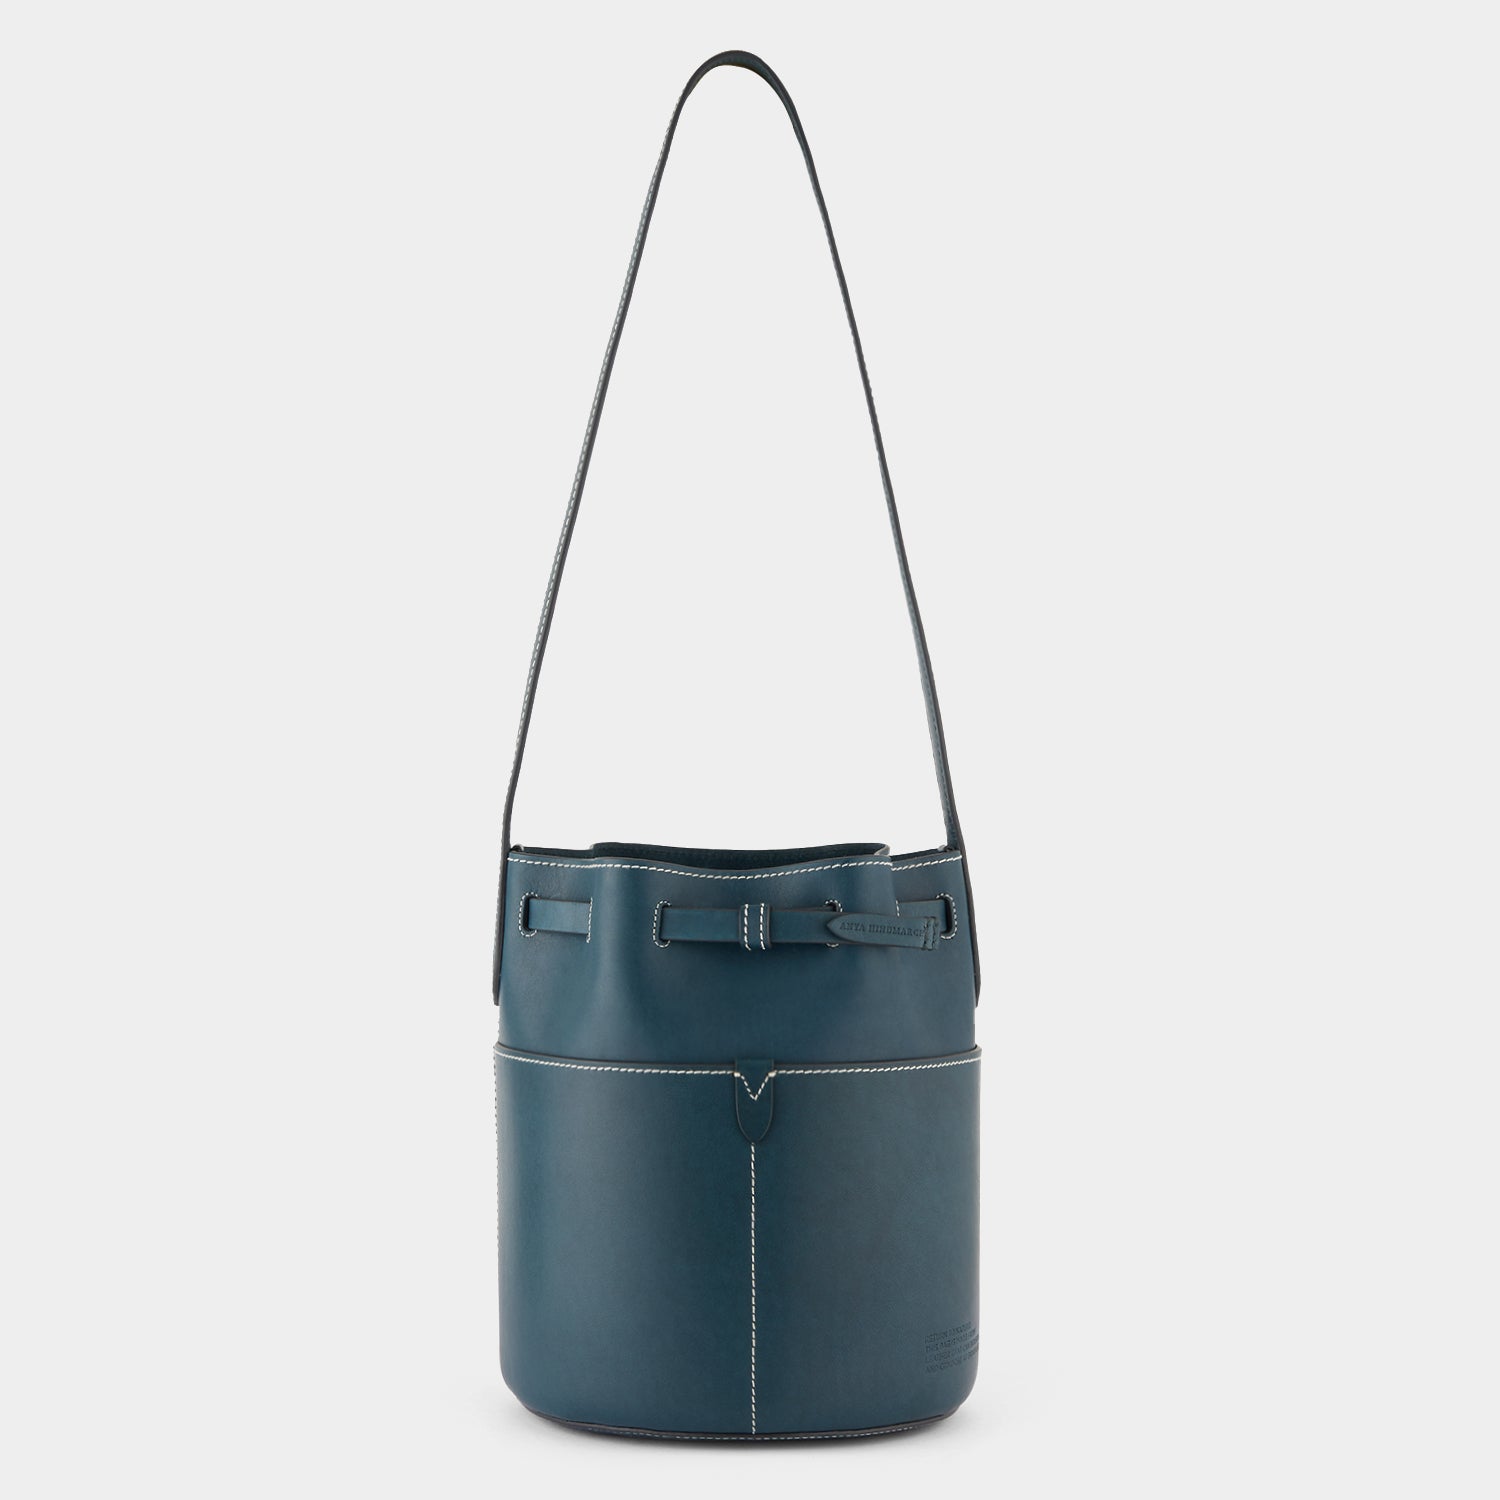 Return to Nature Small Bucket Bag -

                  
                    Compostable Leather in Dark Holly -
                  

                  Anya Hindmarch UK
